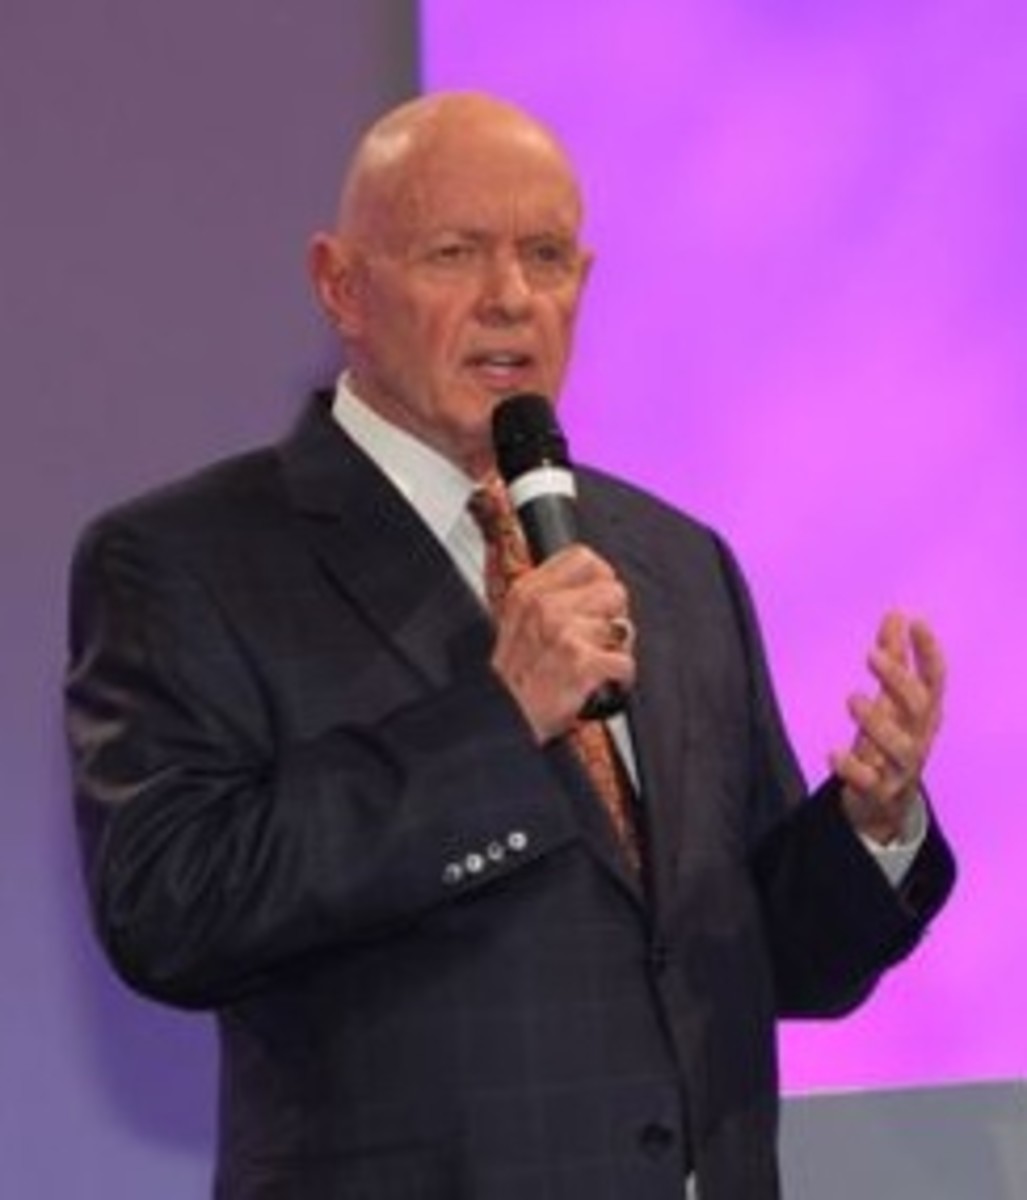 Stephen R. Covey (1932 - 2012) inspired more than effectiveness, he inspired us to make the world a better place.